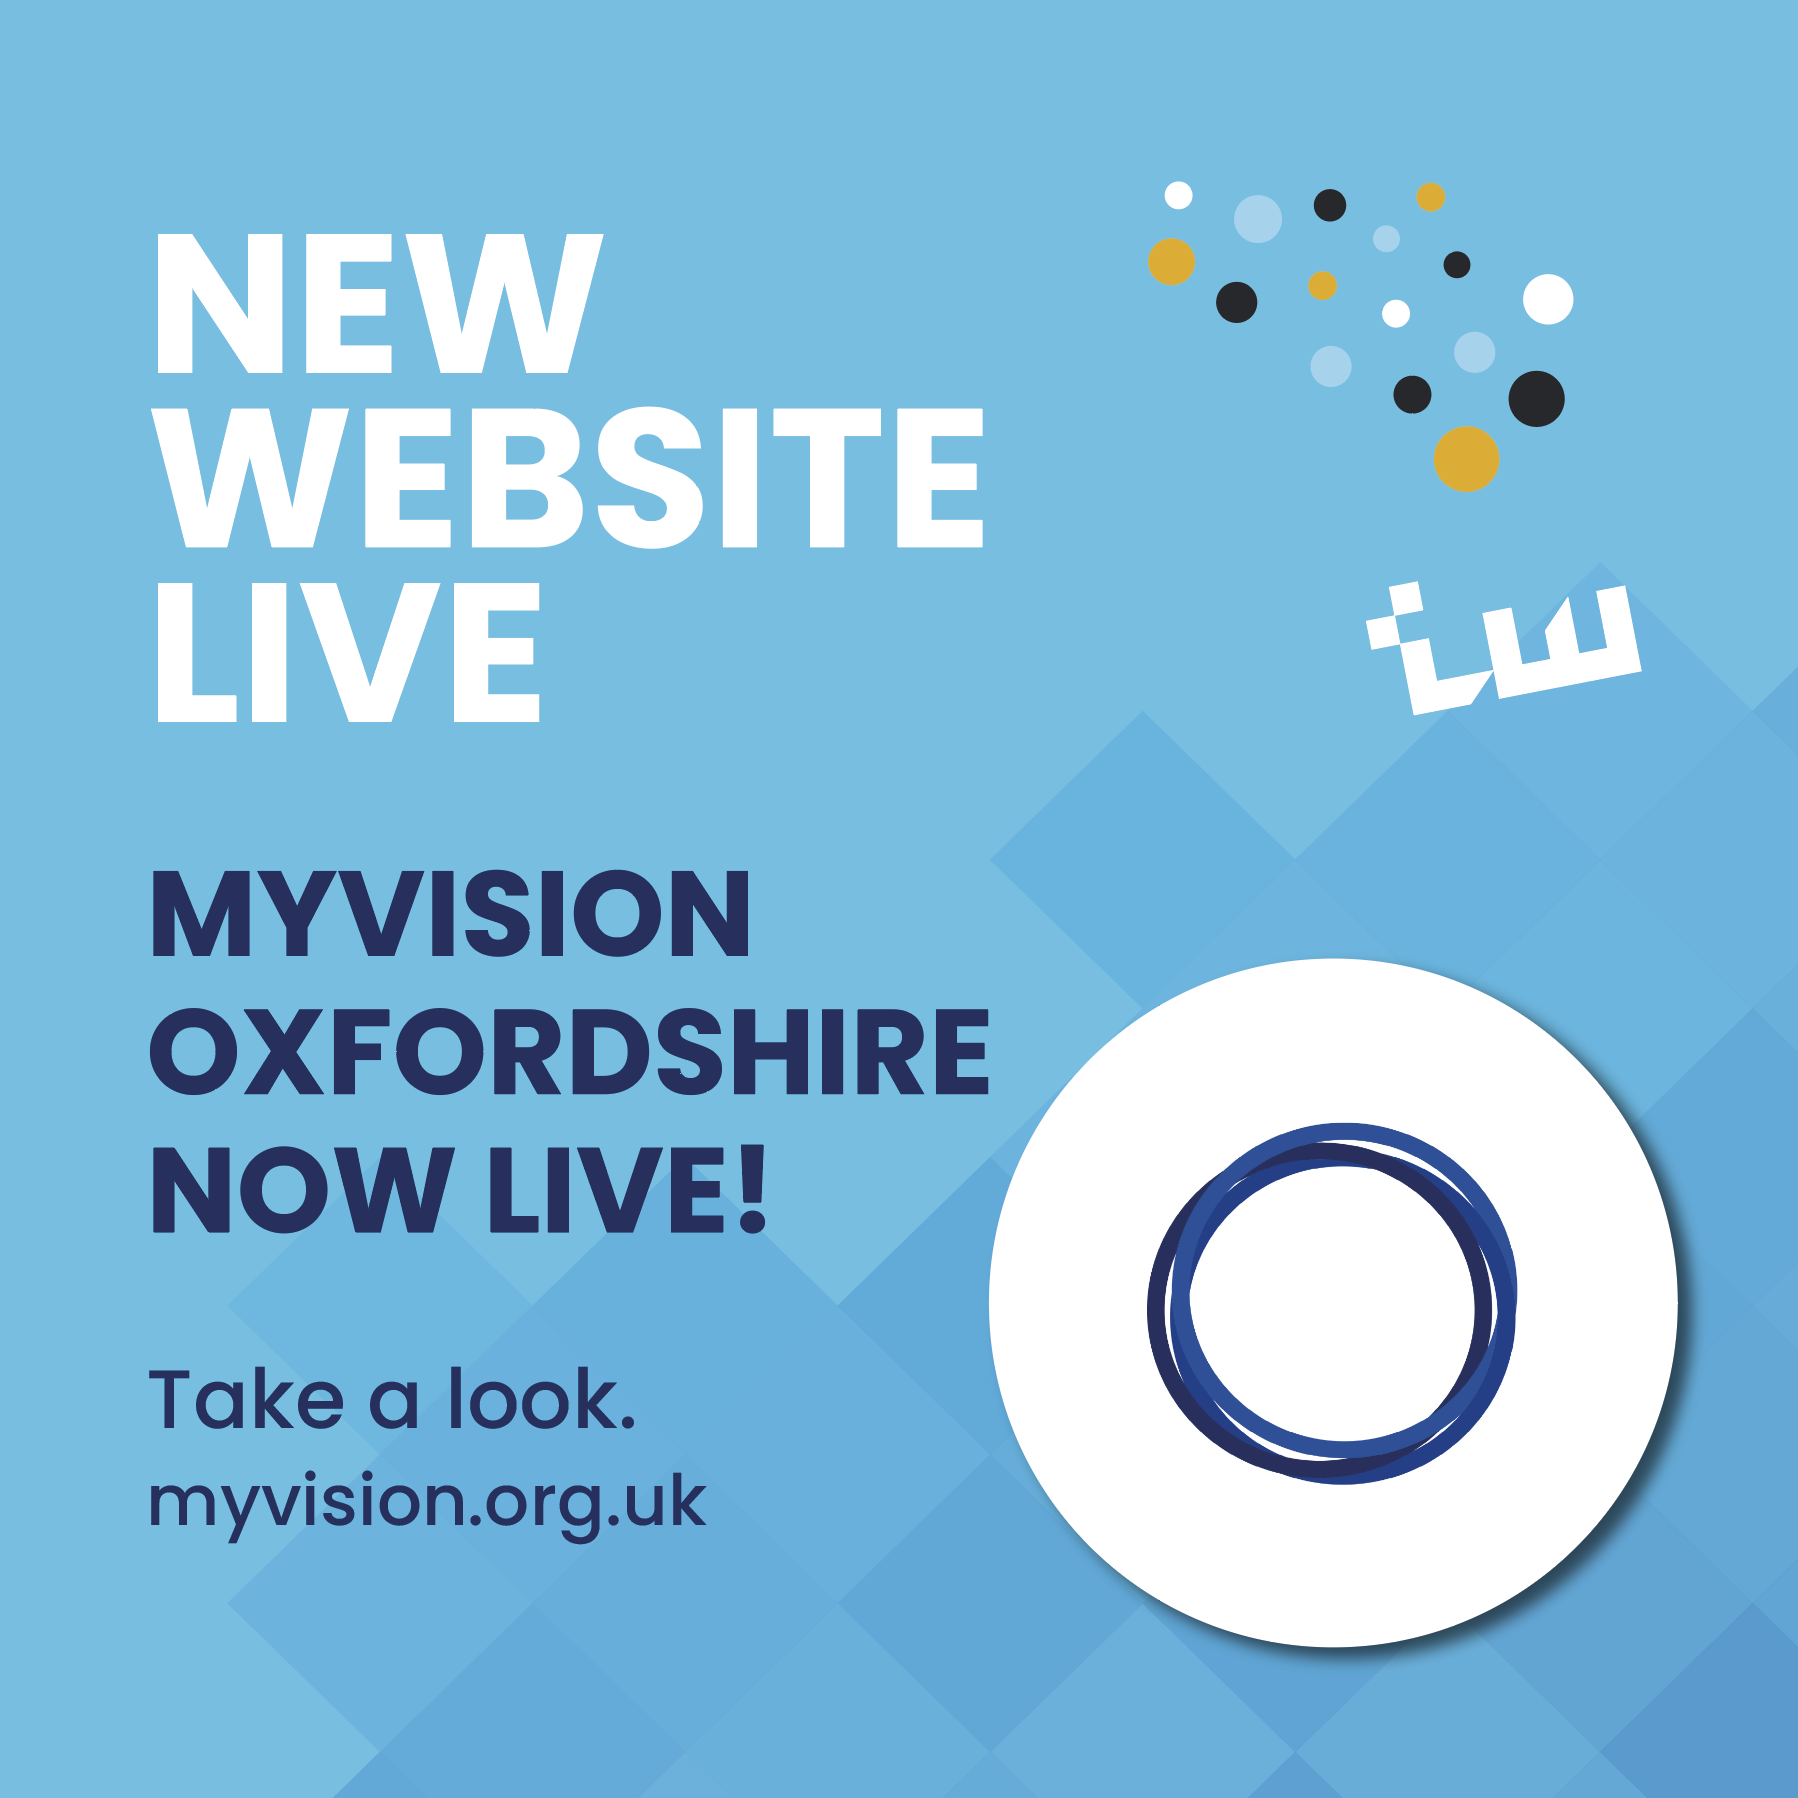 Poster says: new website live, MyVision Oxfordshire, check it out now myvision.org.uk